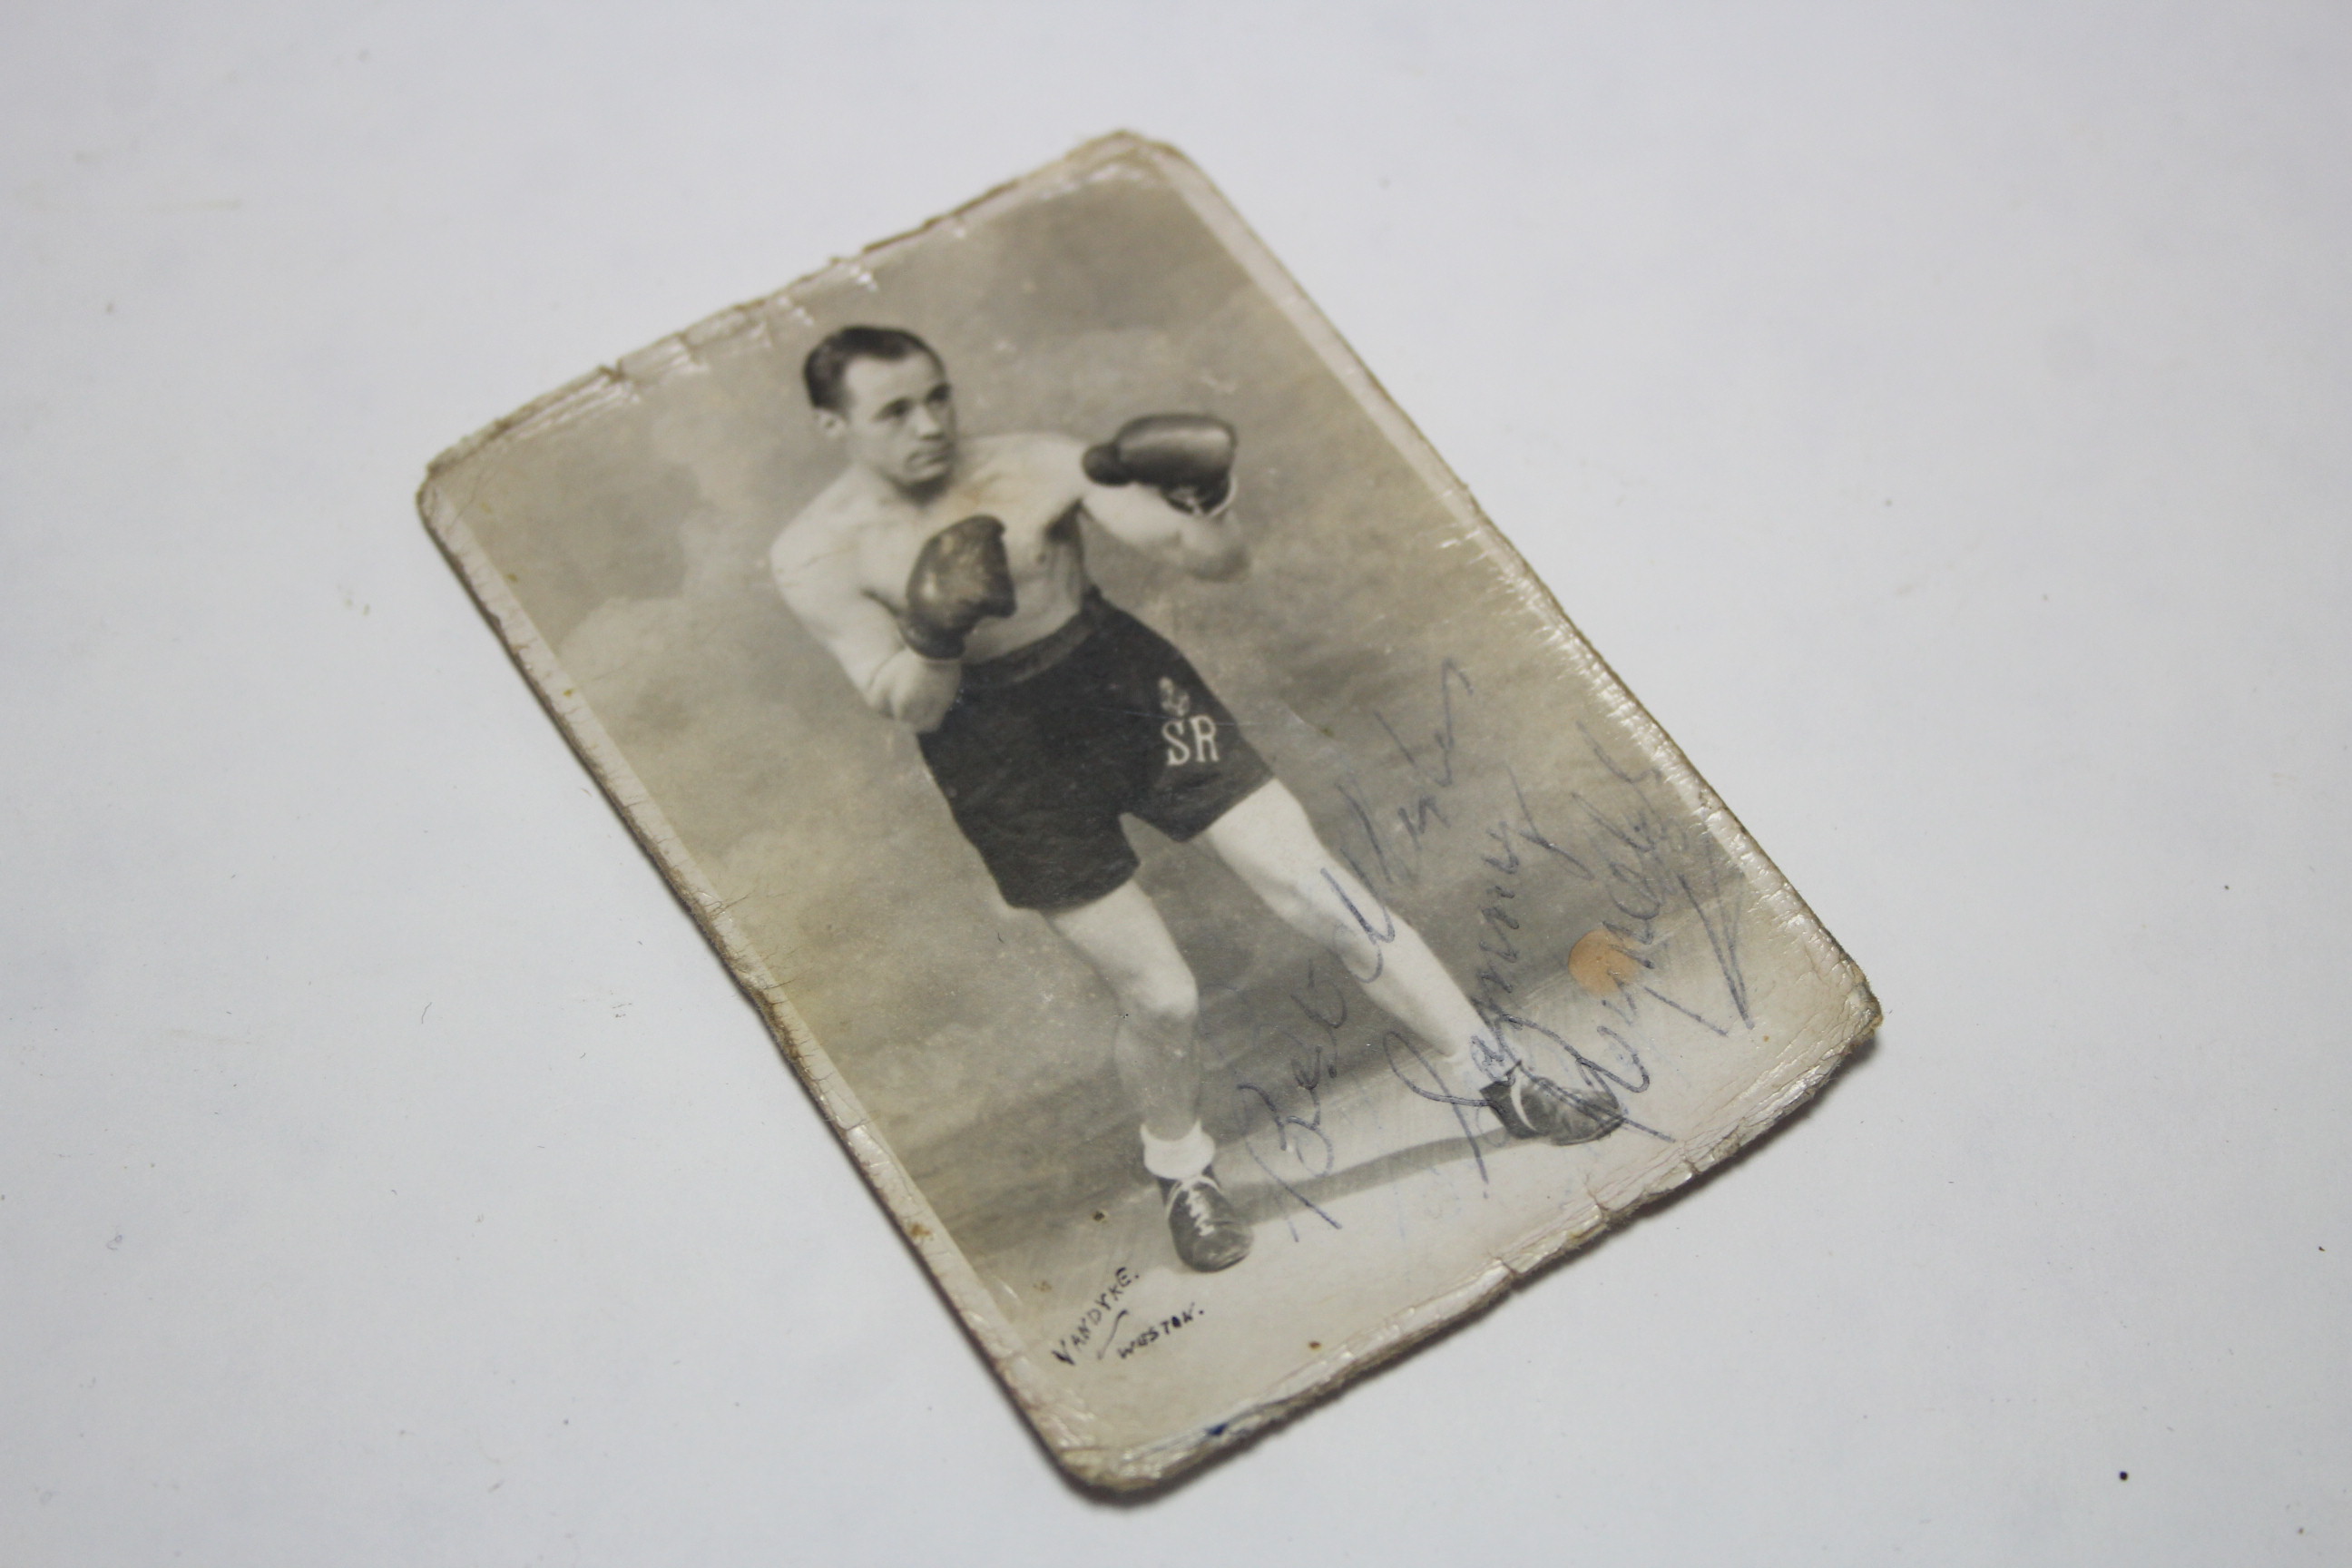 A mid-20th century autographed photograph of the boxer Sammy Reynolds, 3½” x 2¼”, un-framed - Image 3 of 3